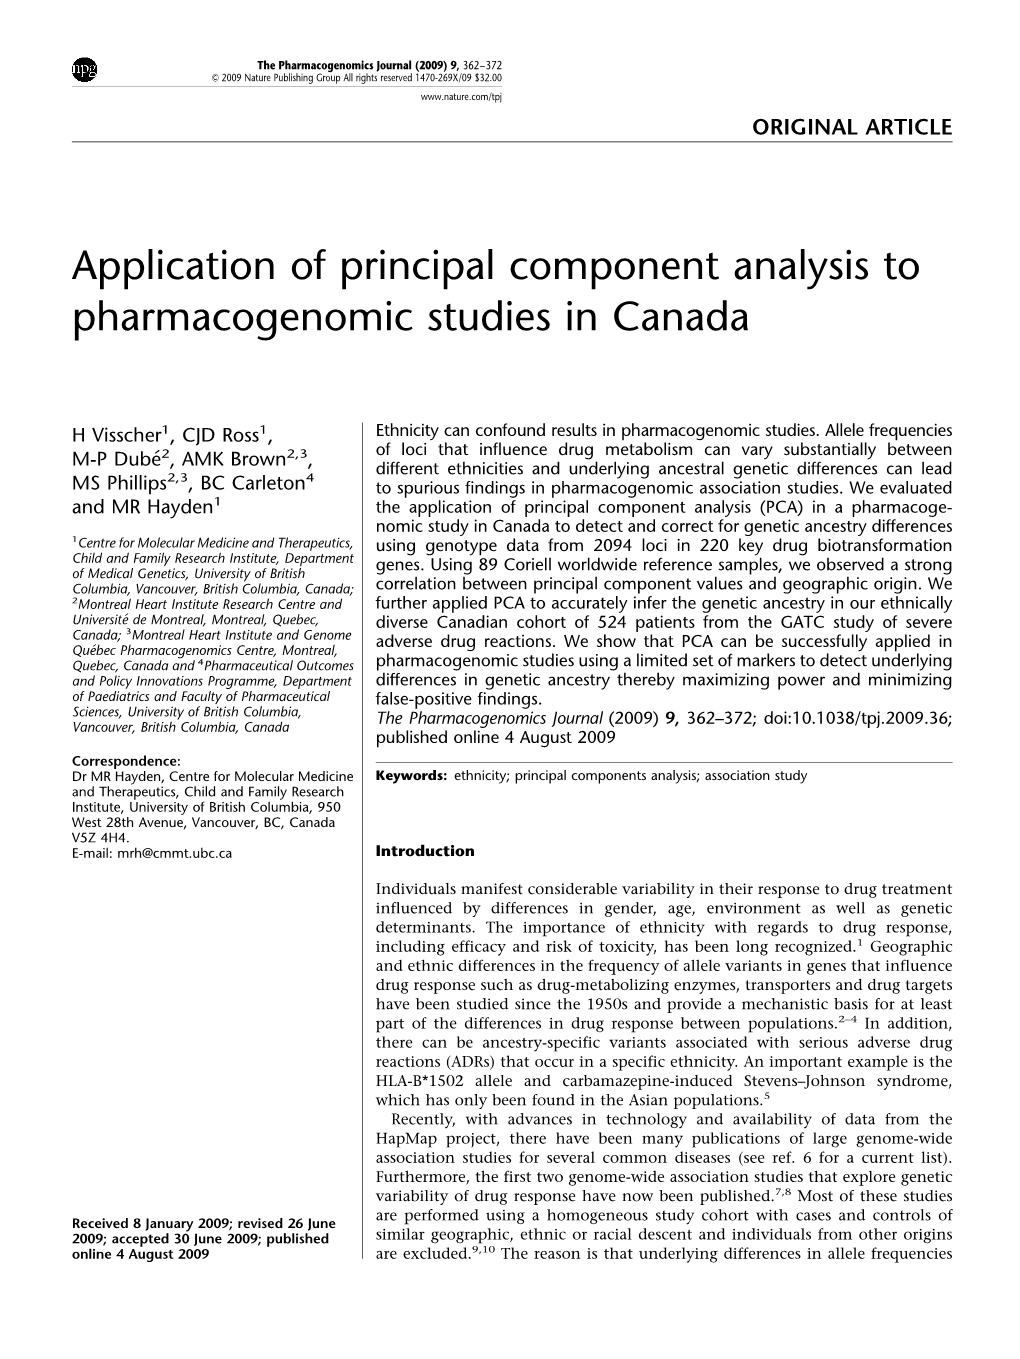 Application of Principal Component Analysis to Pharmacogenomic Studies in Canada